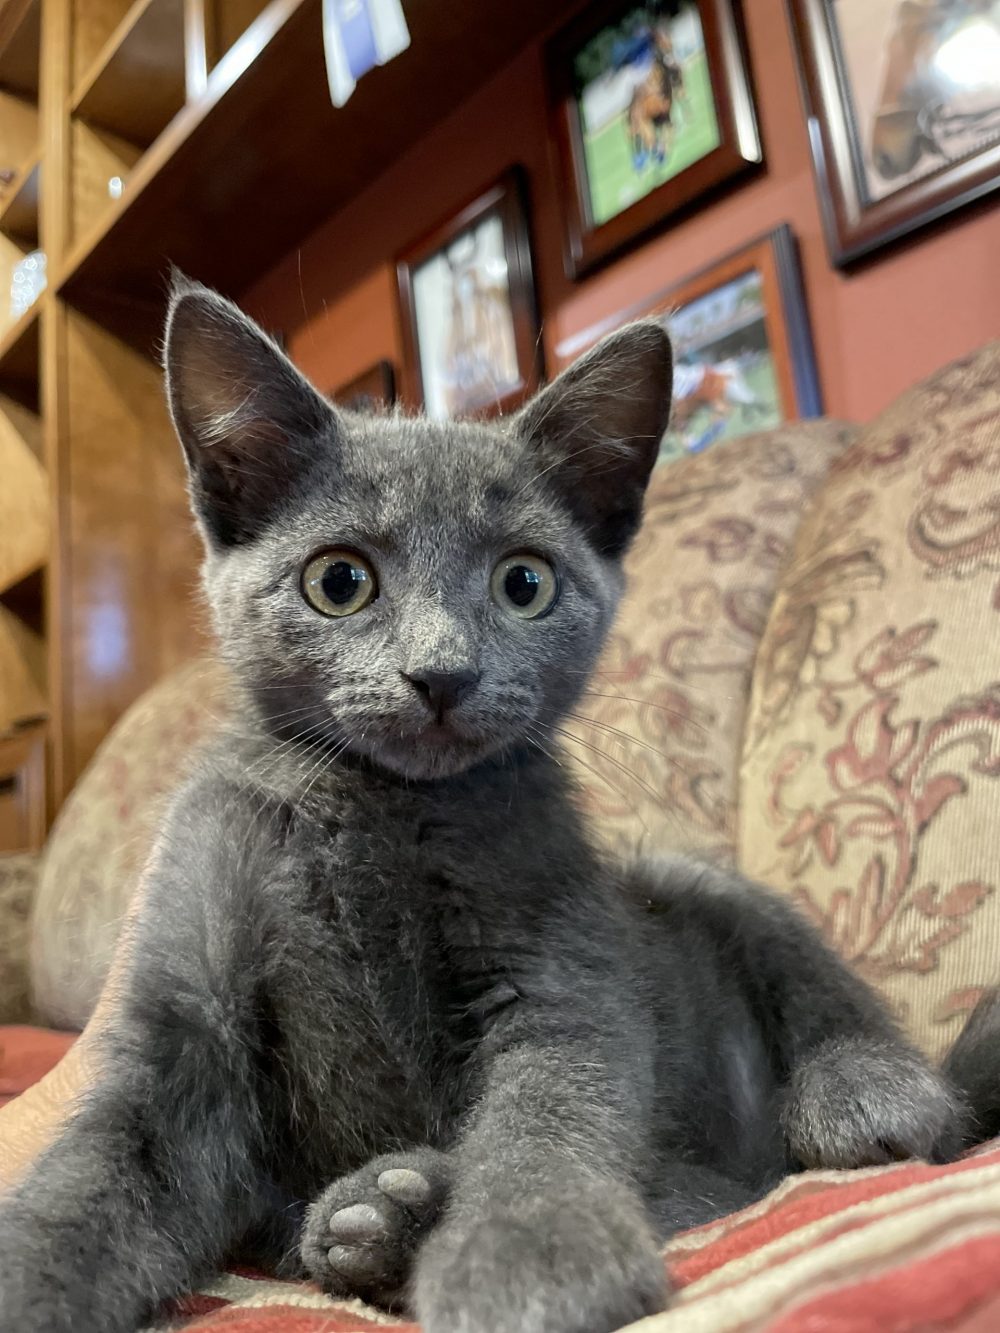 Toto's twin, Dorothy, is a stunning Blue shorthair kitten. She is very smart and alert. She likes to sit back and watch her brothers get into trouble first. She will make a wonderful pet. Fine around other cats and dogs. Born: 07/17/22